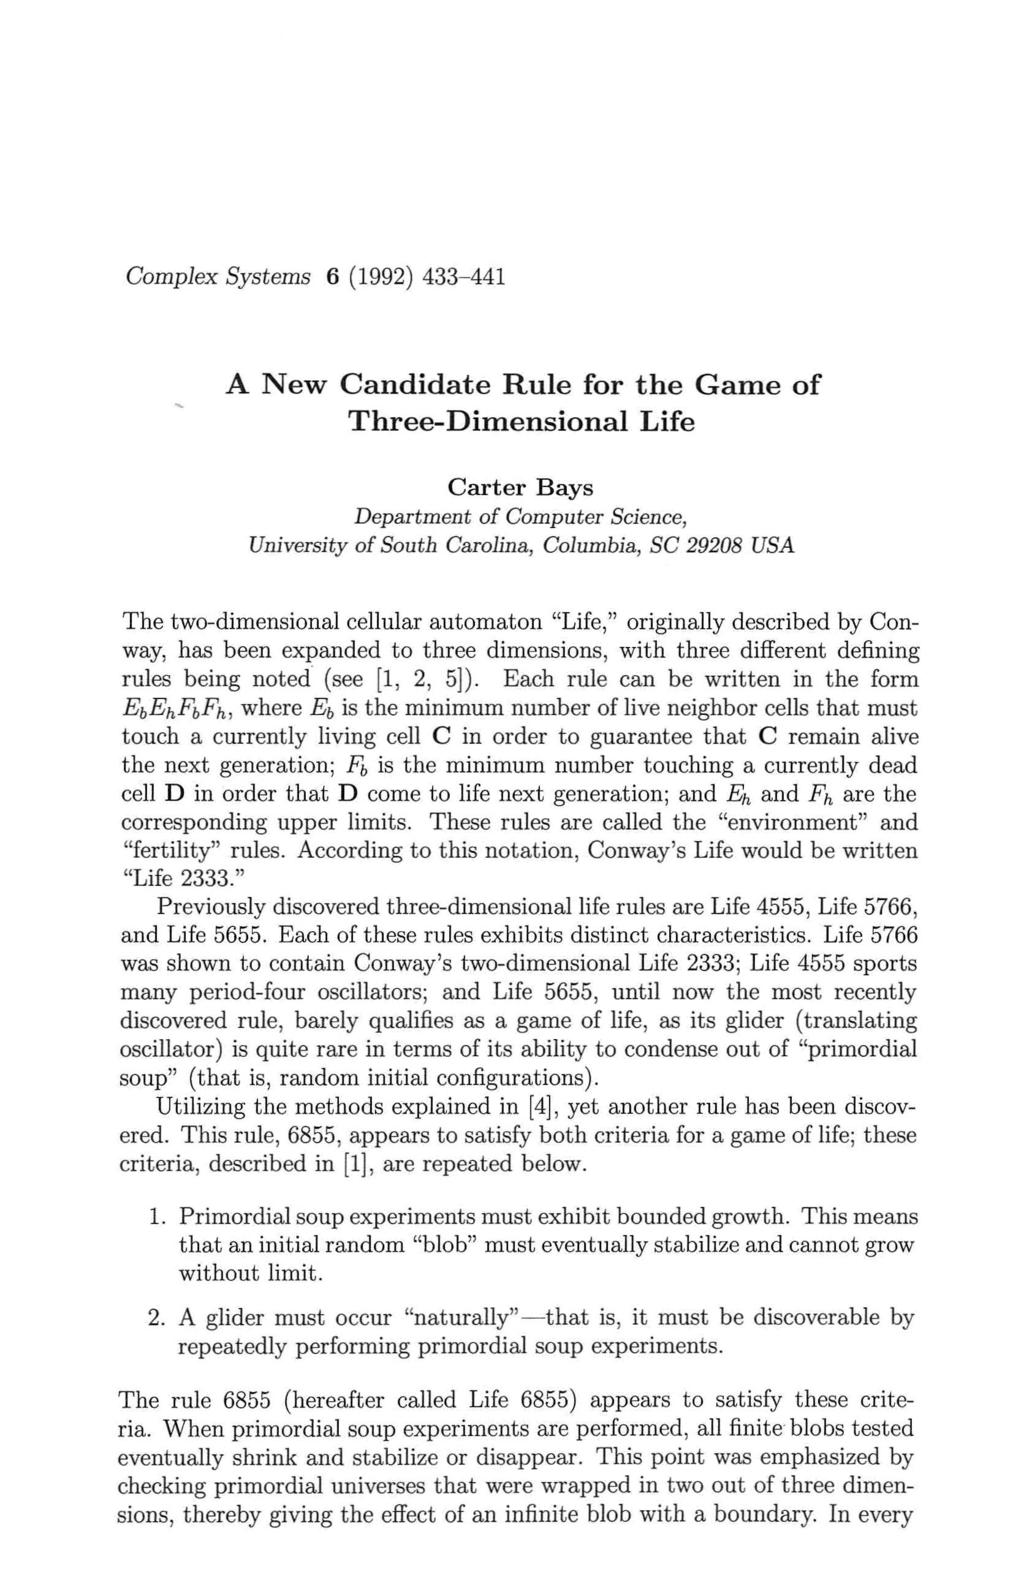 Complex Systems 6 (1992) 433-441 ANew Candidate Rule for t he Game of Three-Dimensional Life Carter Bays Departm ent of Computer Science, University of South Carolina, Columbia, SC 29208 USA T he